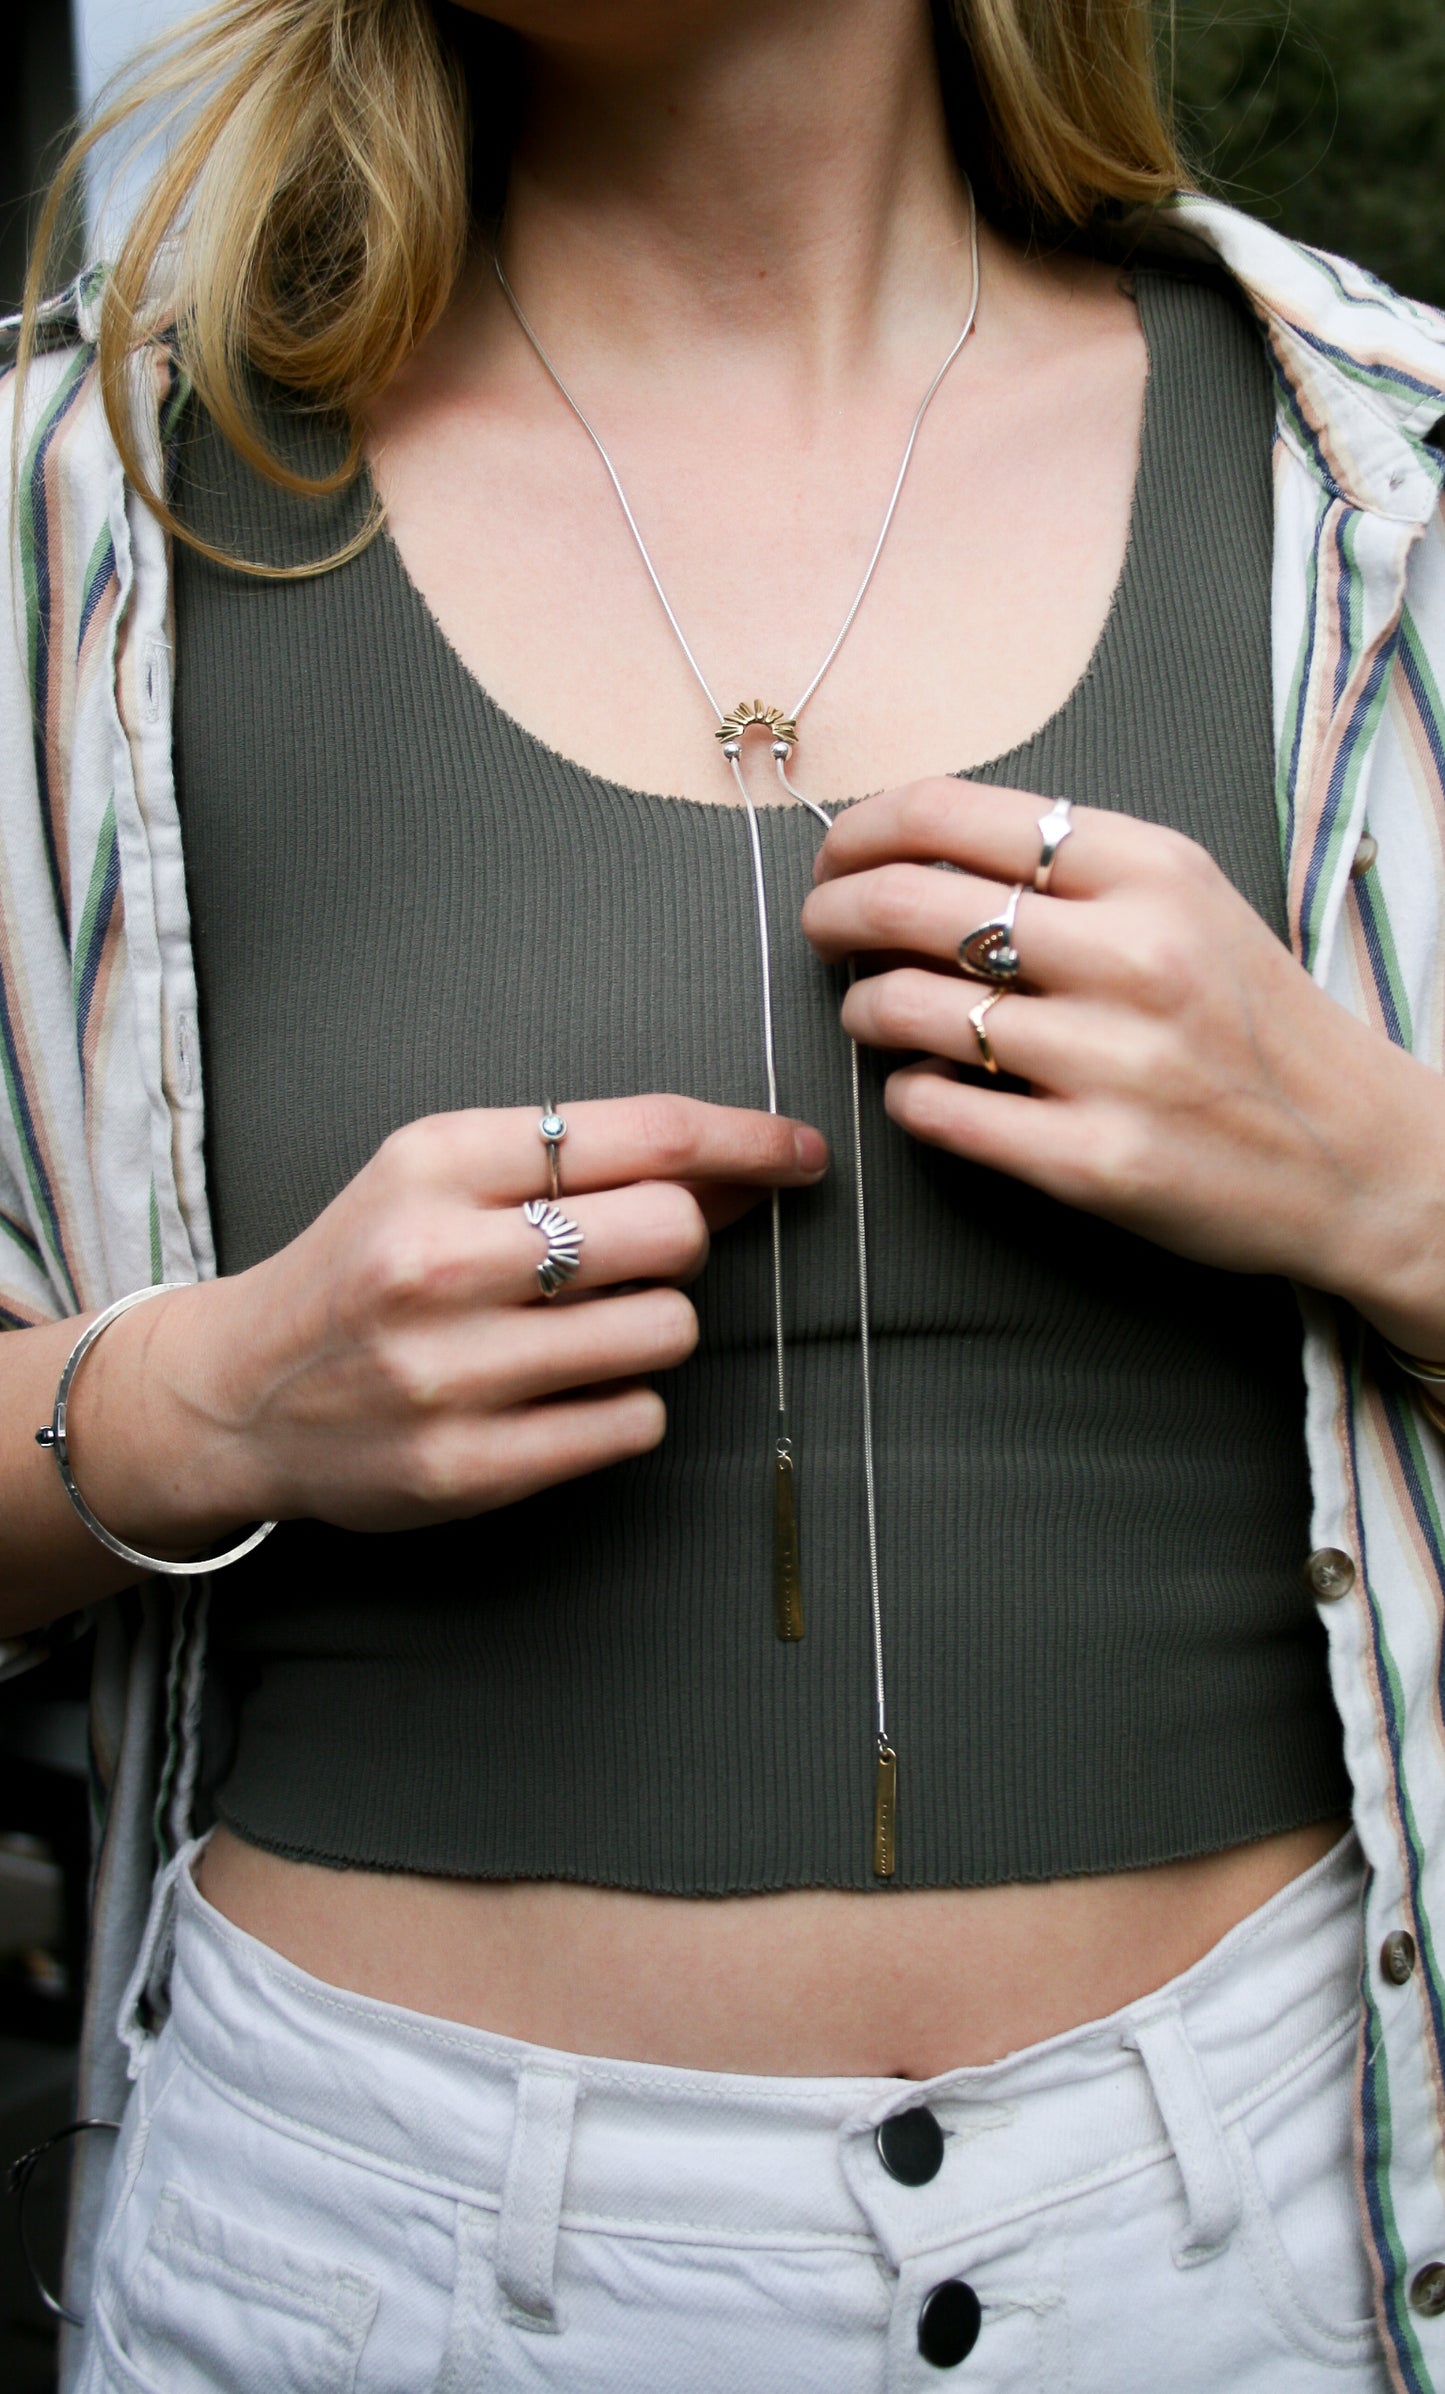 Necklace Bolo Tie | Made-to-Order